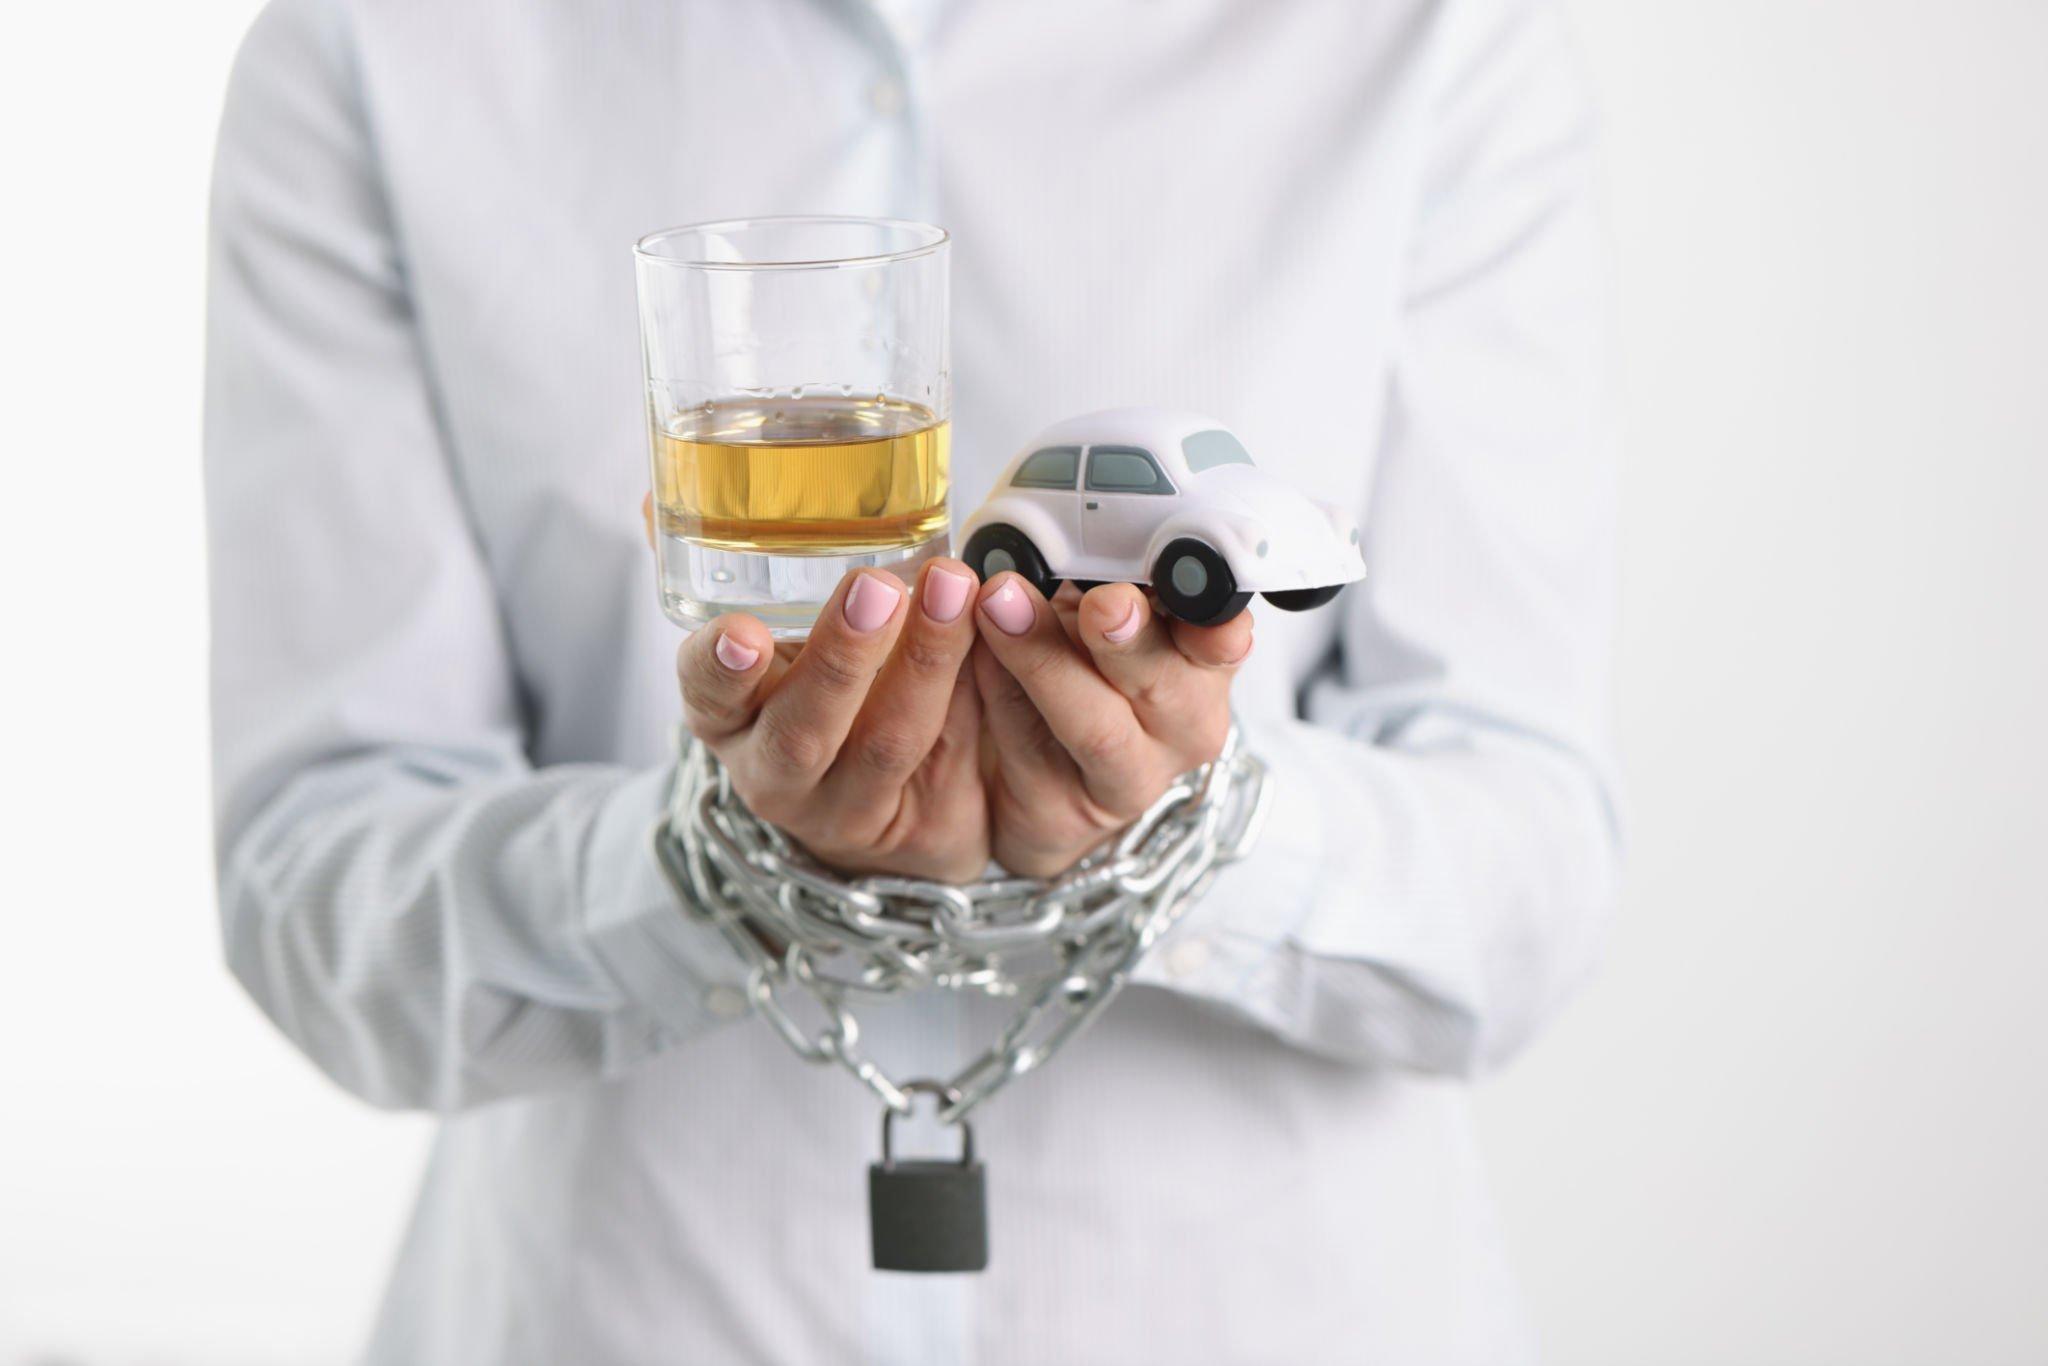 If You are Arrested for DUI Case In Las Vegas Then What You Should Do?